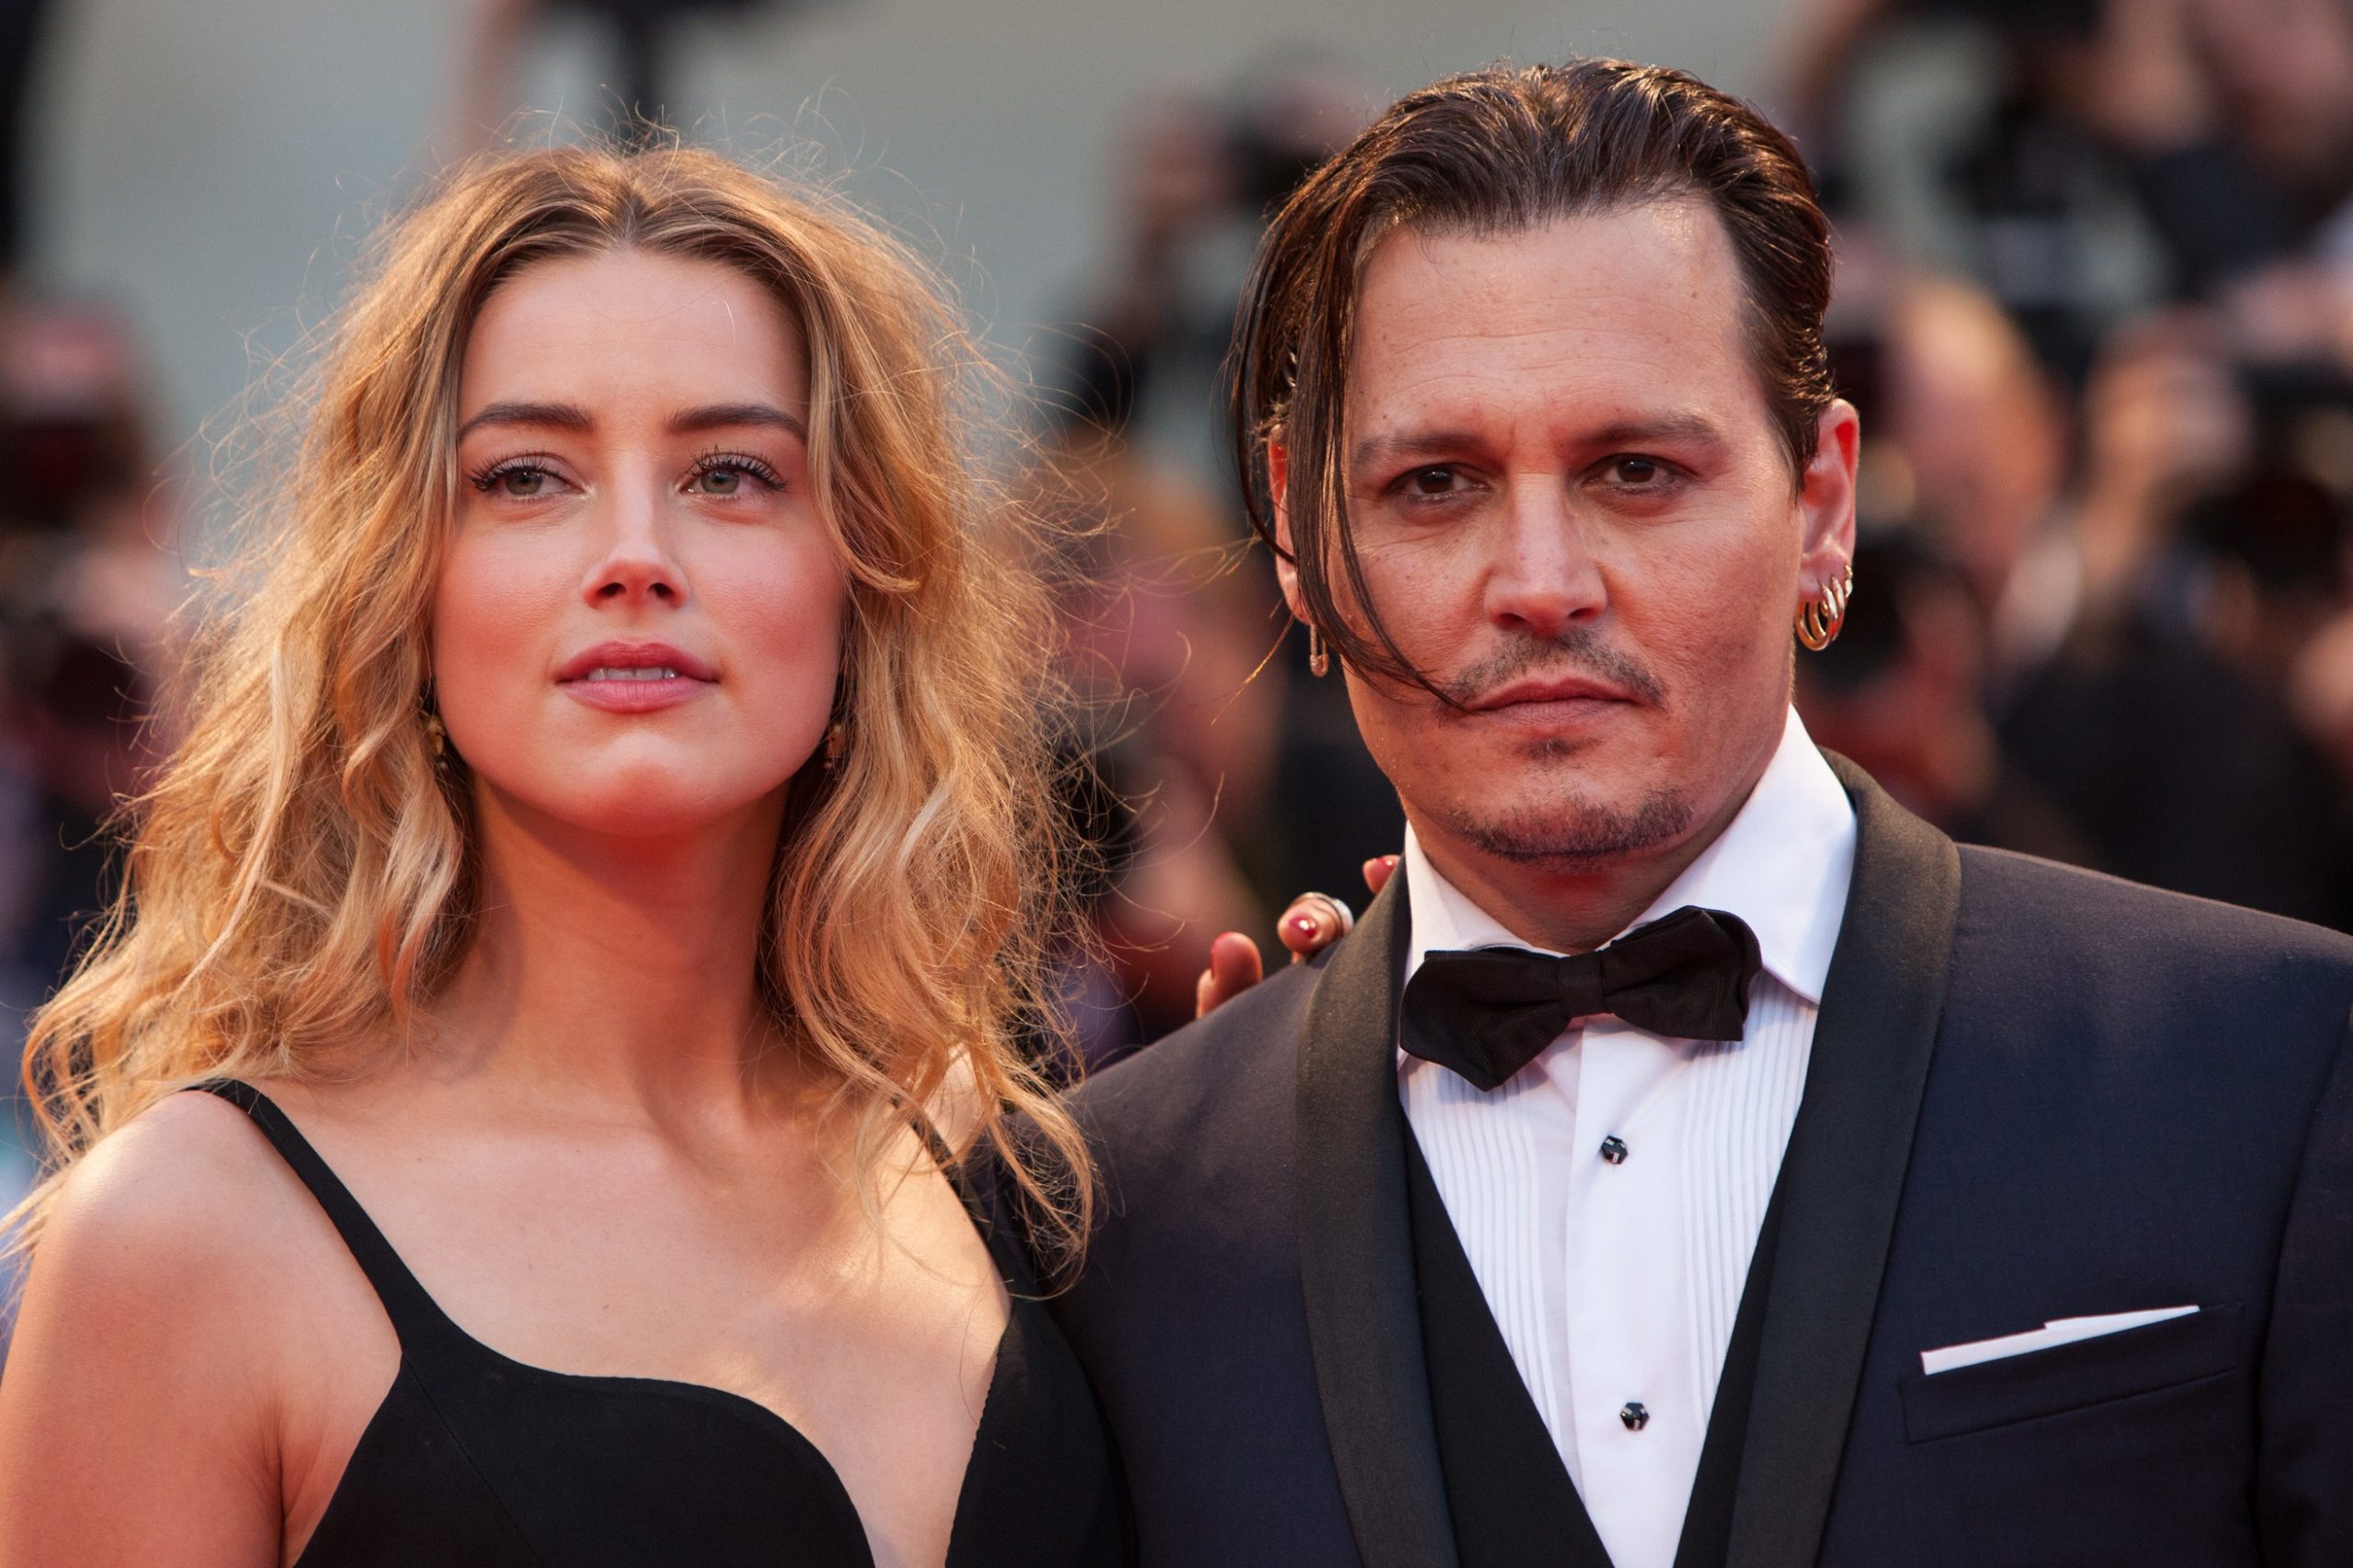 Amber Heard and Johnny Depp seen at a ceremony.